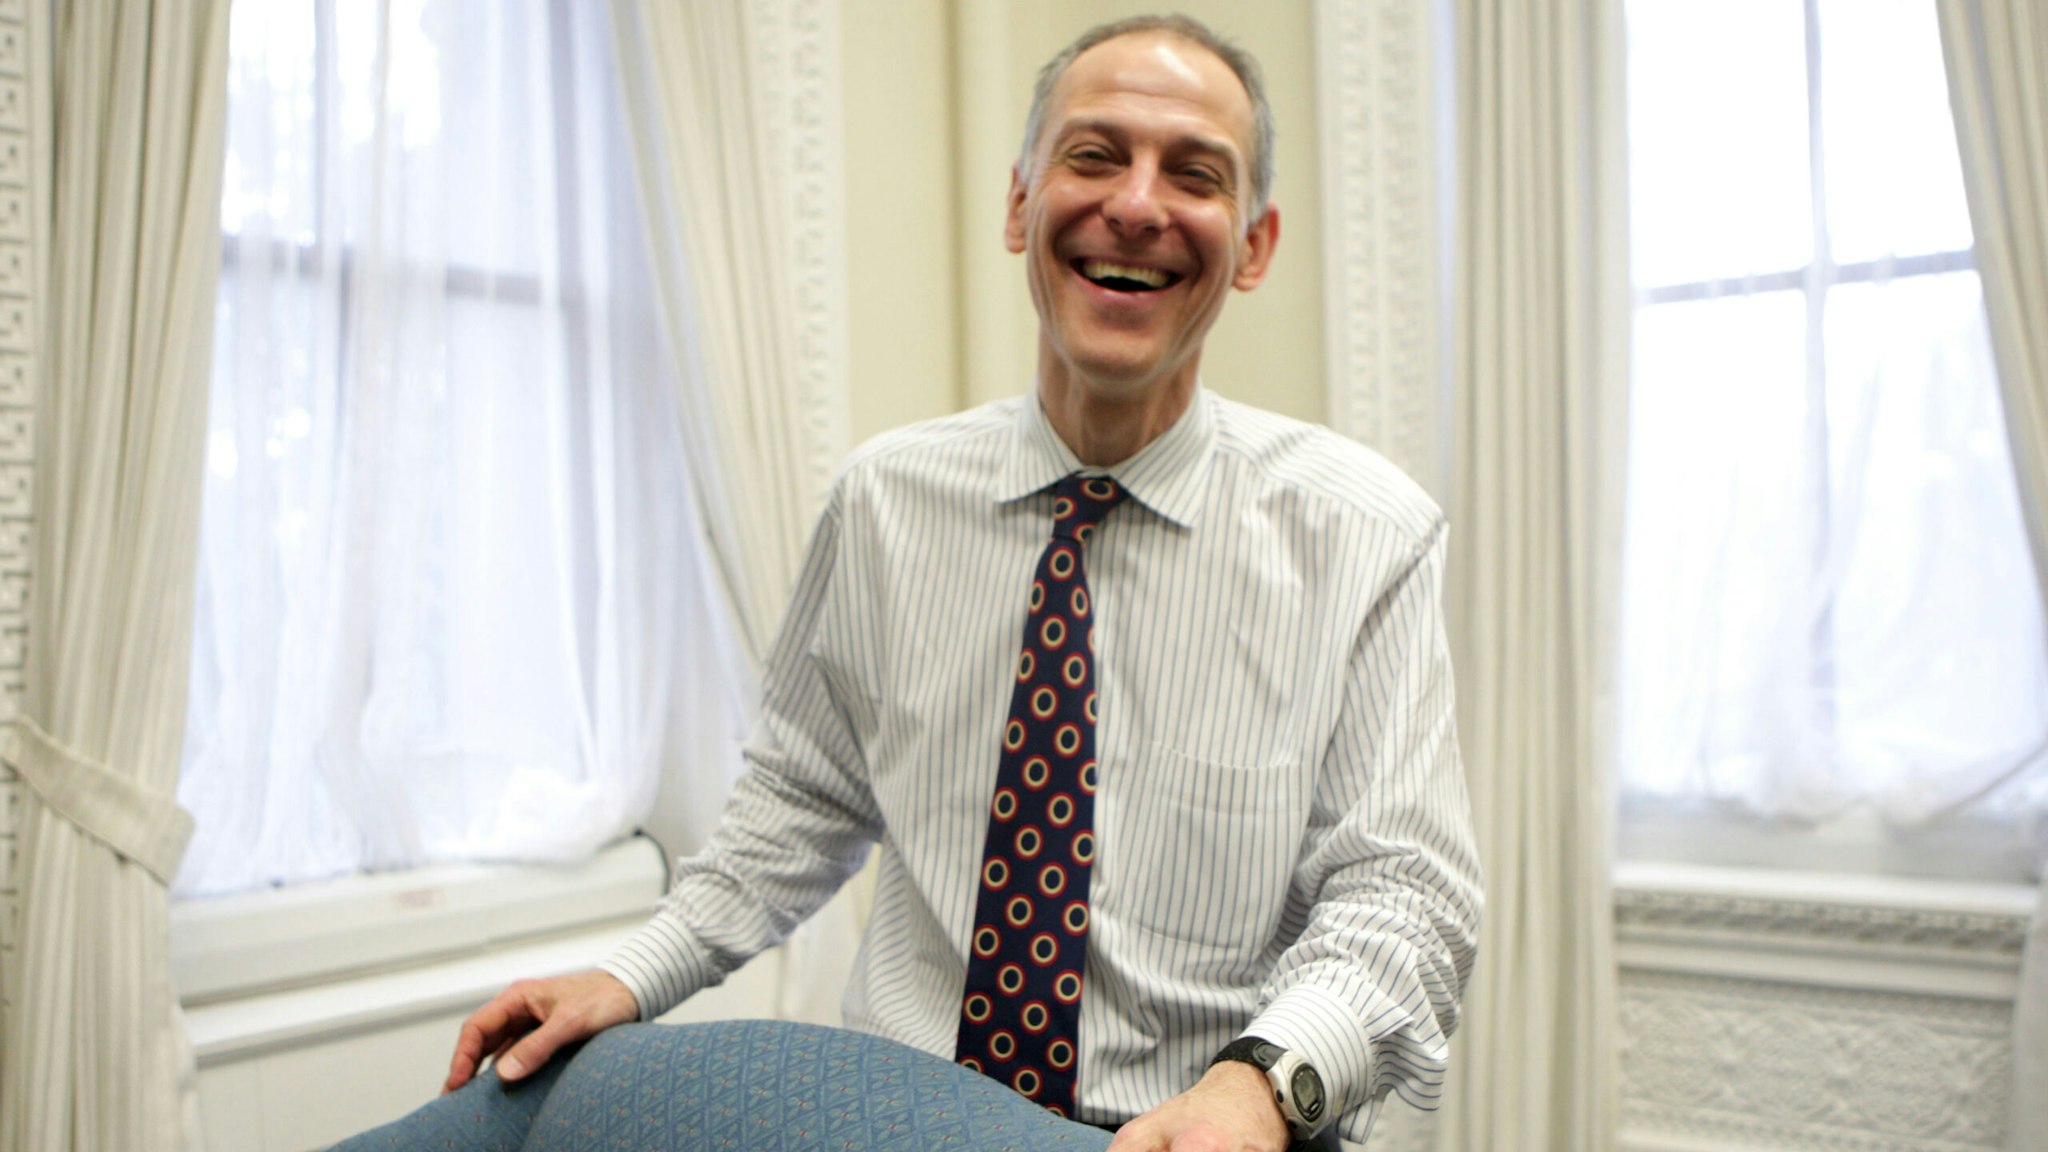 Dr. Zeke Emanuel, older brother of Rahm and now working in the administration on health care reform, is interviewed in an office in the Old Eisenhower Office Building in Washington, D.C., March 16, 2009.